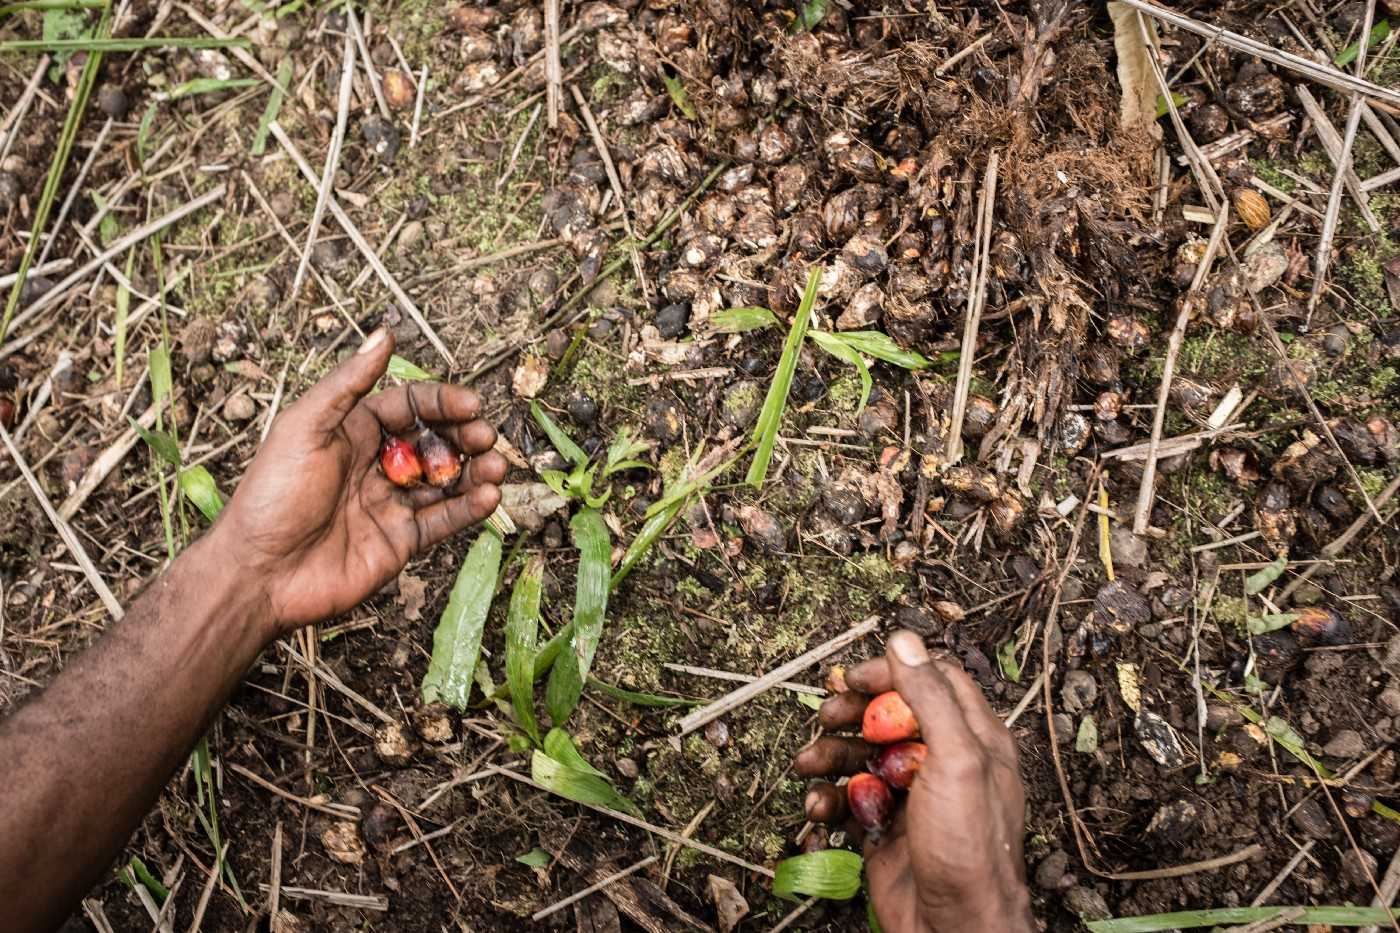 A Papuan collects oil palm fruitlets that have been separated from the main bunch in Kampung Naga, Boven Digoel district.